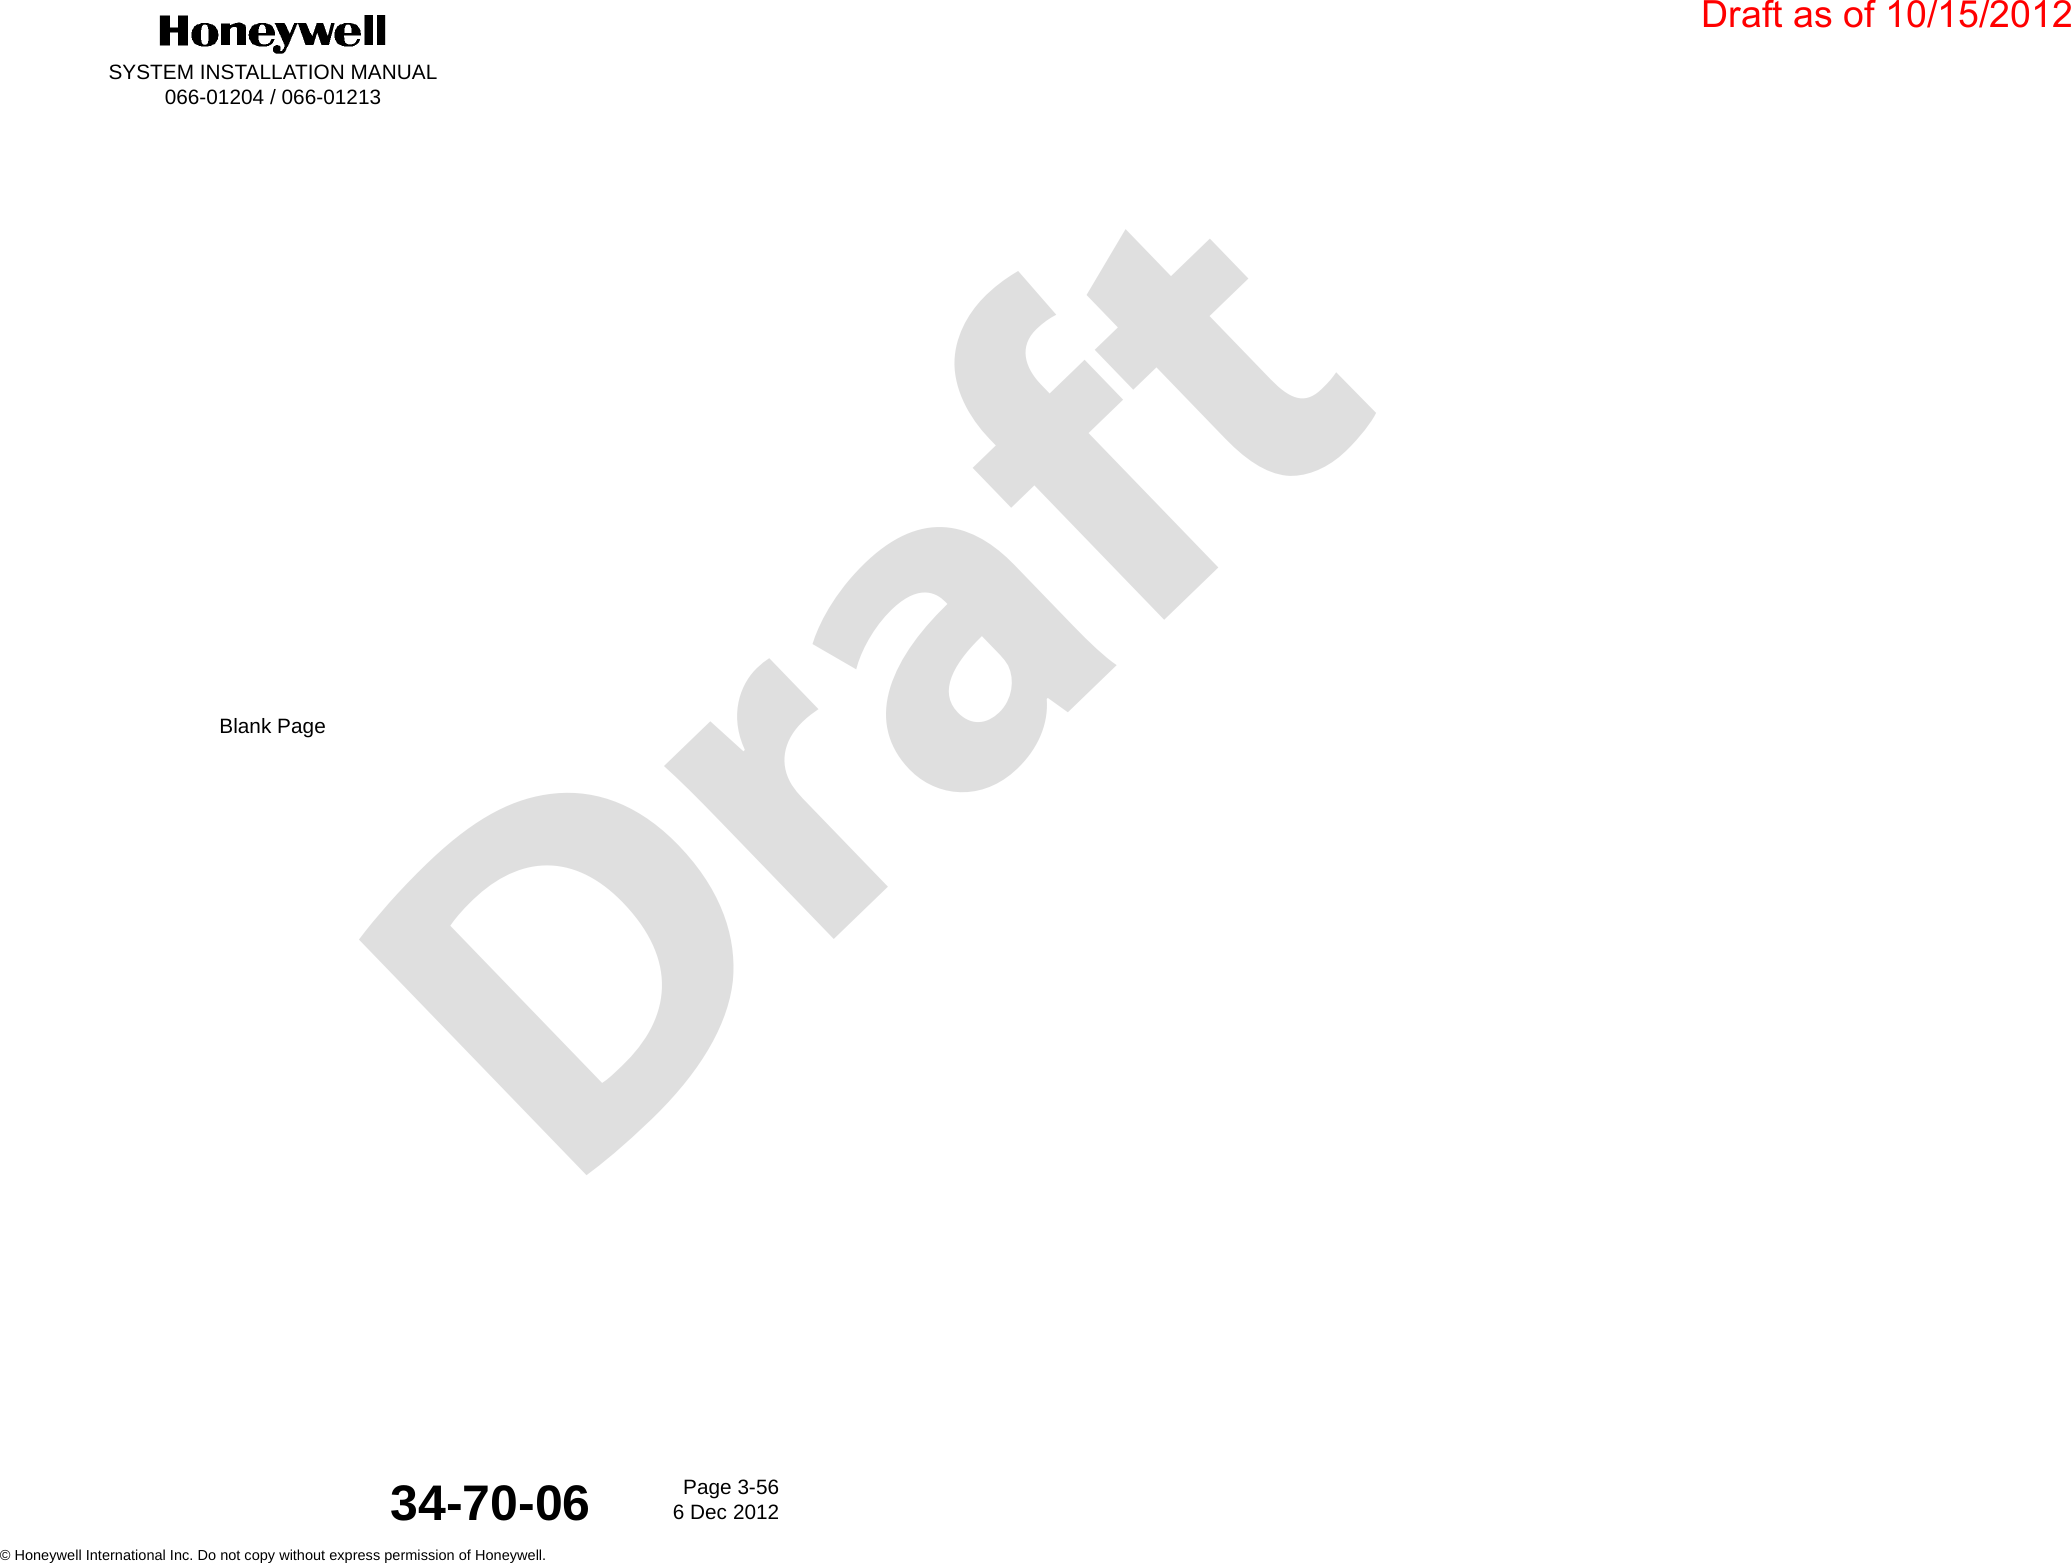 DraftSYSTEM INSTALLATION MANUAL066-01204 / 066-01213Page 3-566 Dec 2012© Honeywell International Inc. Do not copy without express permission of Honeywell.34-70-06Blank PageDraft as of 10/15/2012